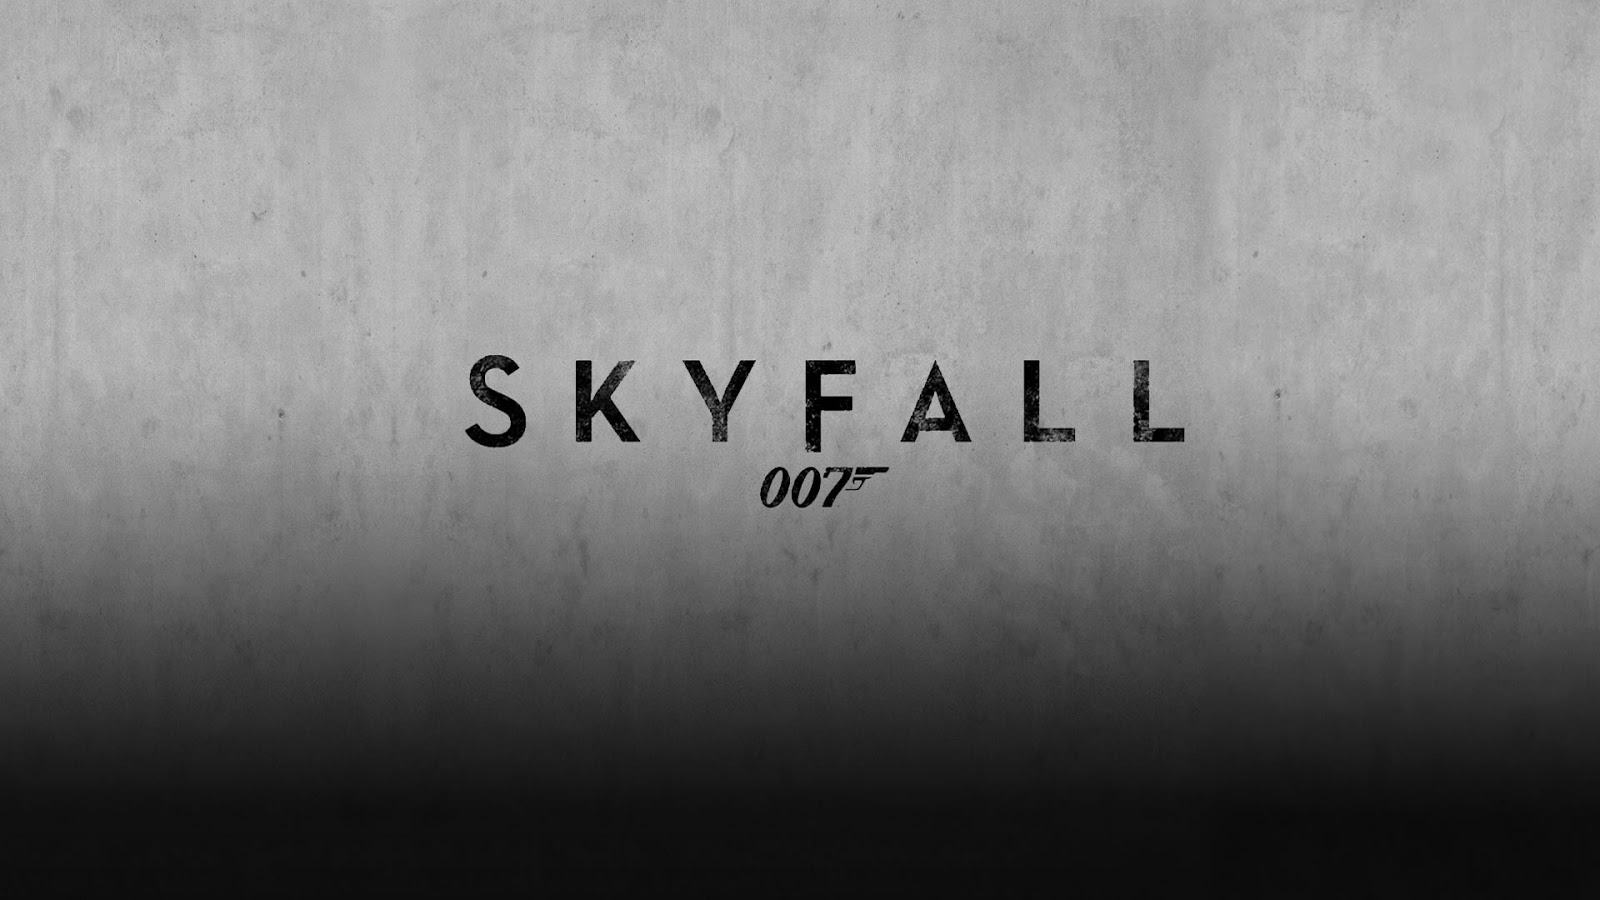 HD Wallpapers for iPhone 5 - James Bond 007 Skyfall Wallpapers